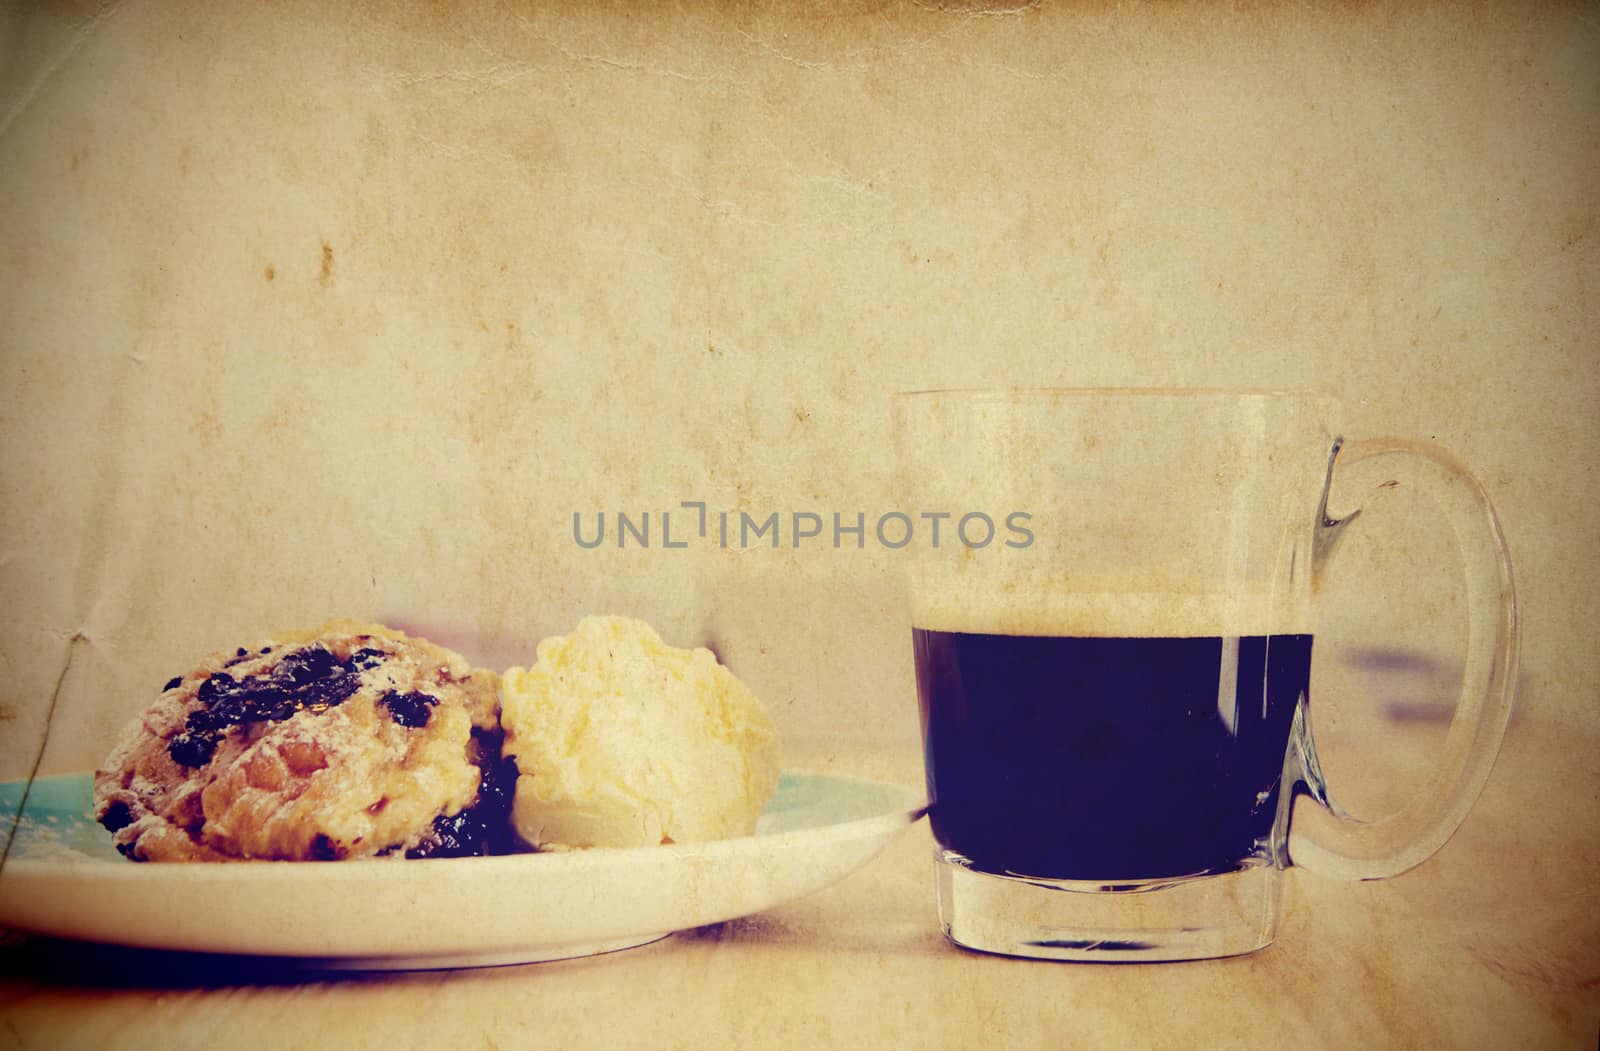 Vintage breakfast with cup of black coffee on wood, grunge paper style